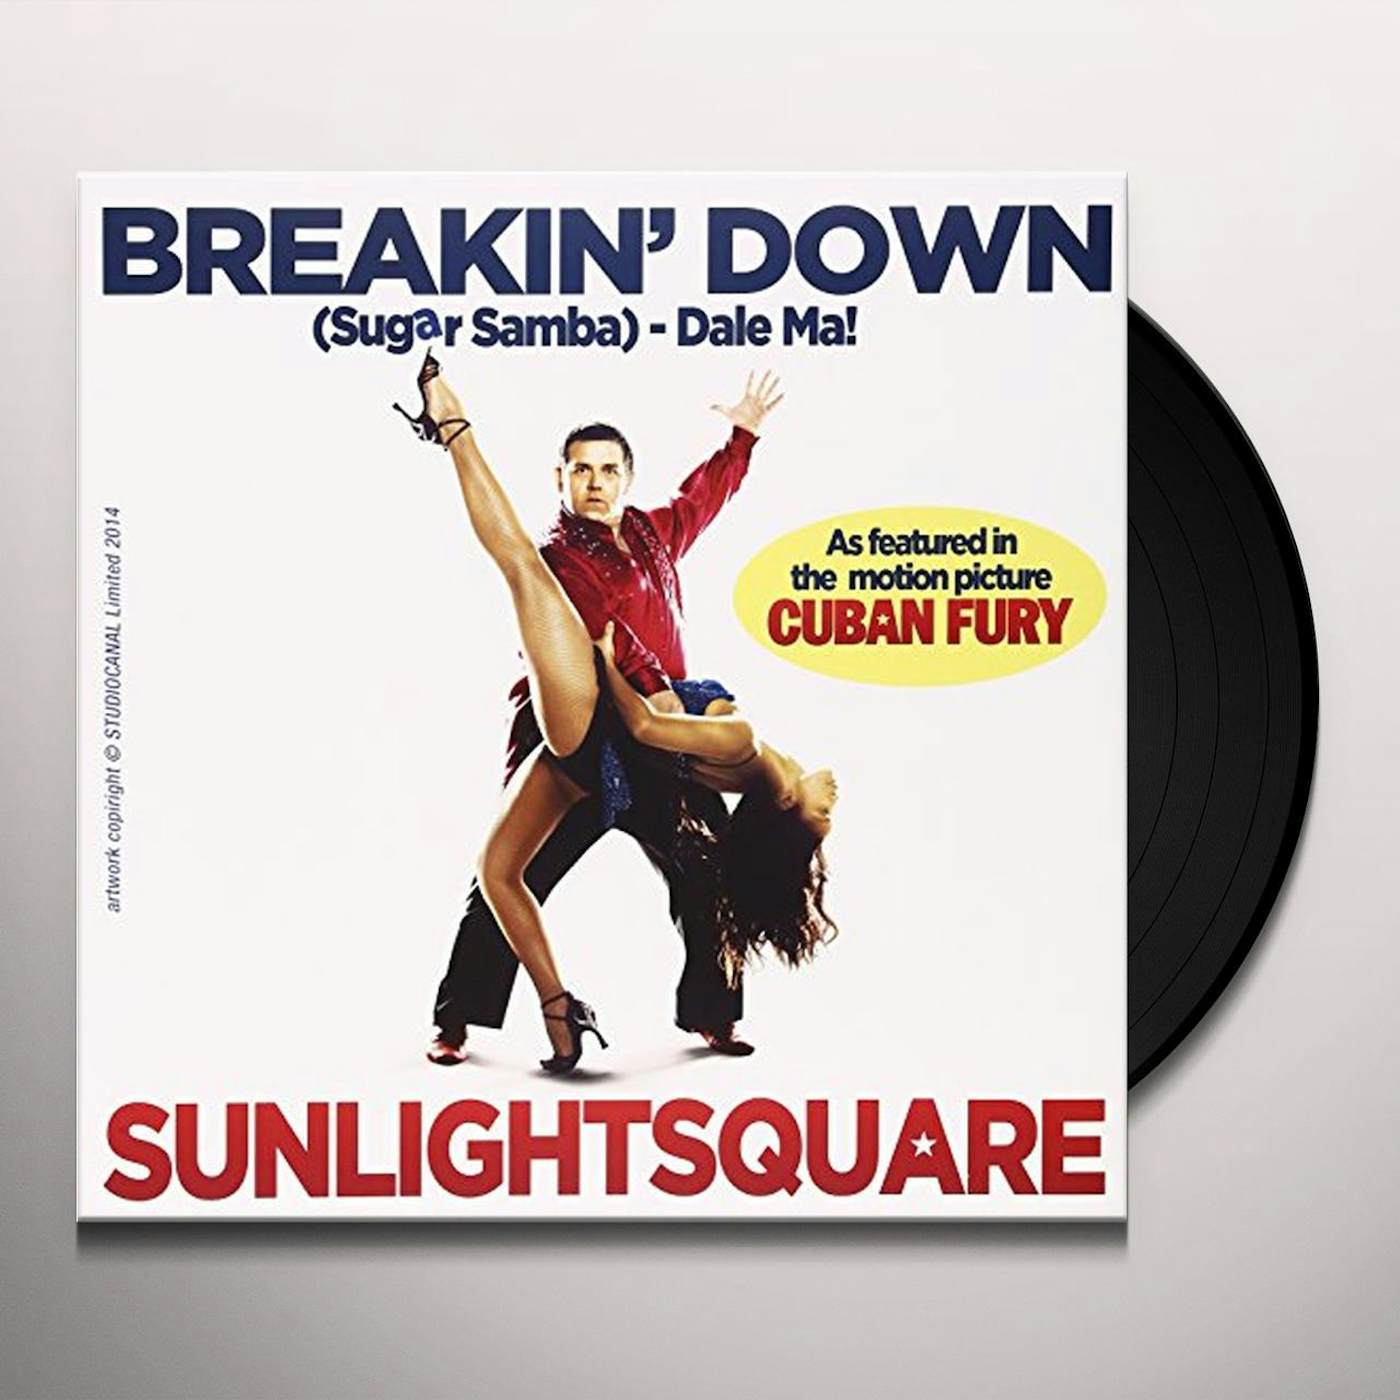 Sunlightsquare BREAKIN' DOWN (FROM THE FILM CUBAN FURY) Vinyl Record